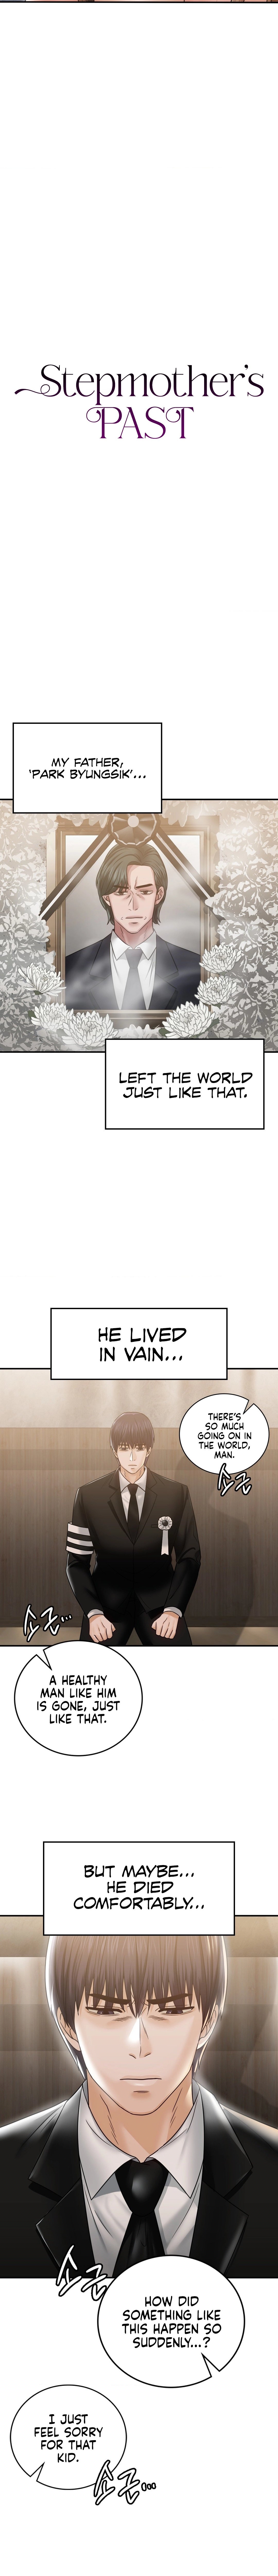 stepmothers-past-chap-3-1